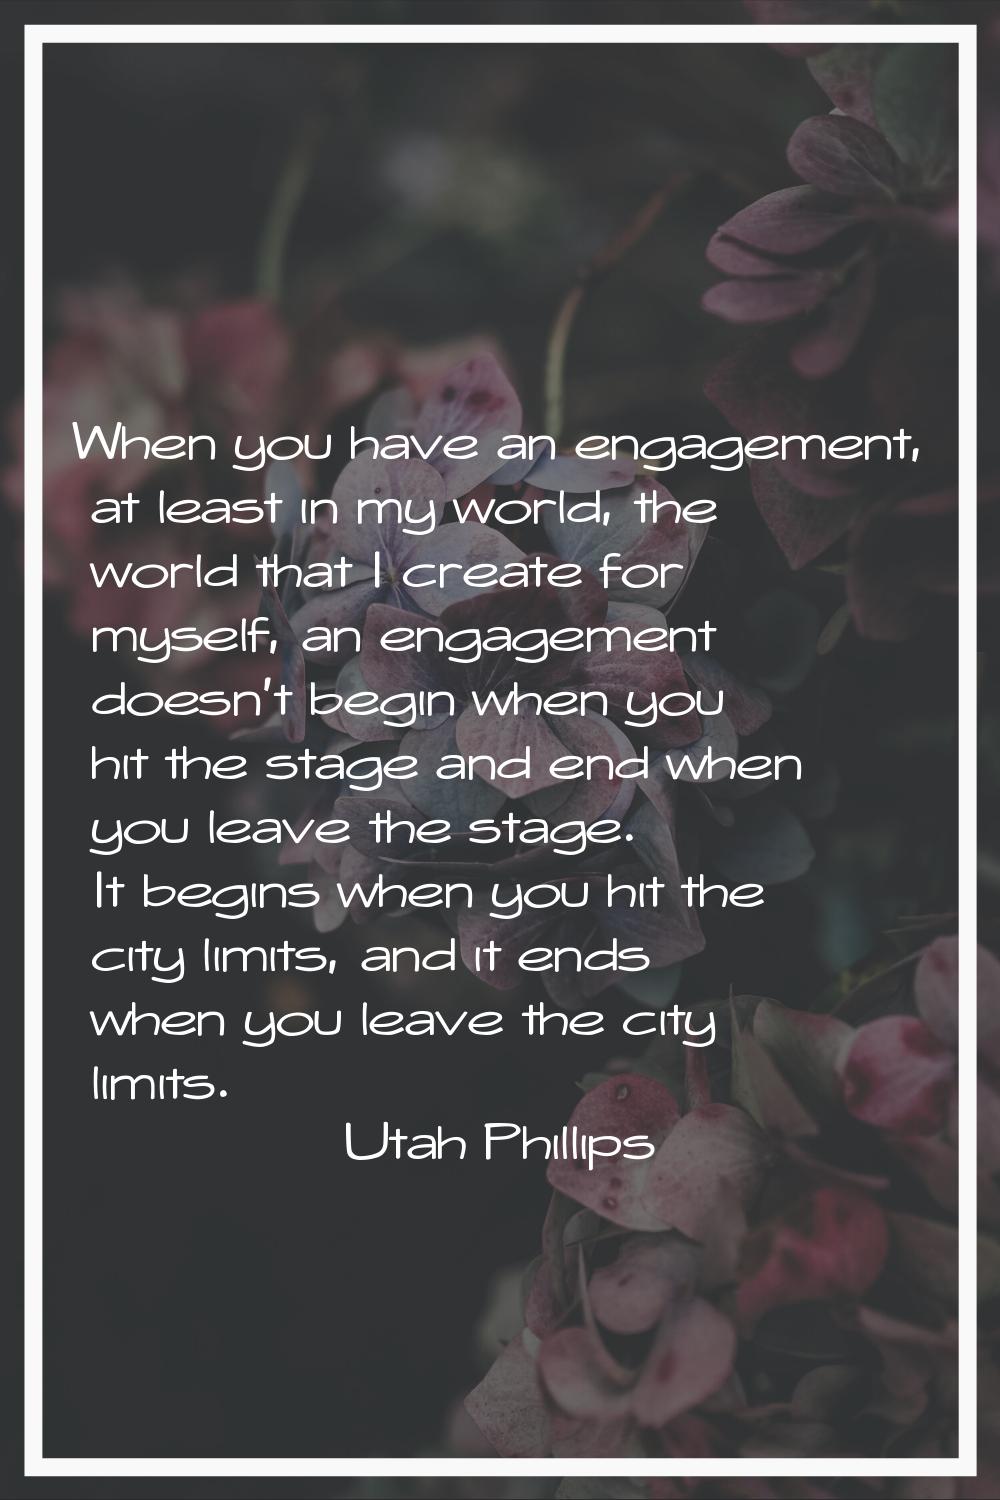 When you have an engagement, at least in my world, the world that I create for myself, an engagemen